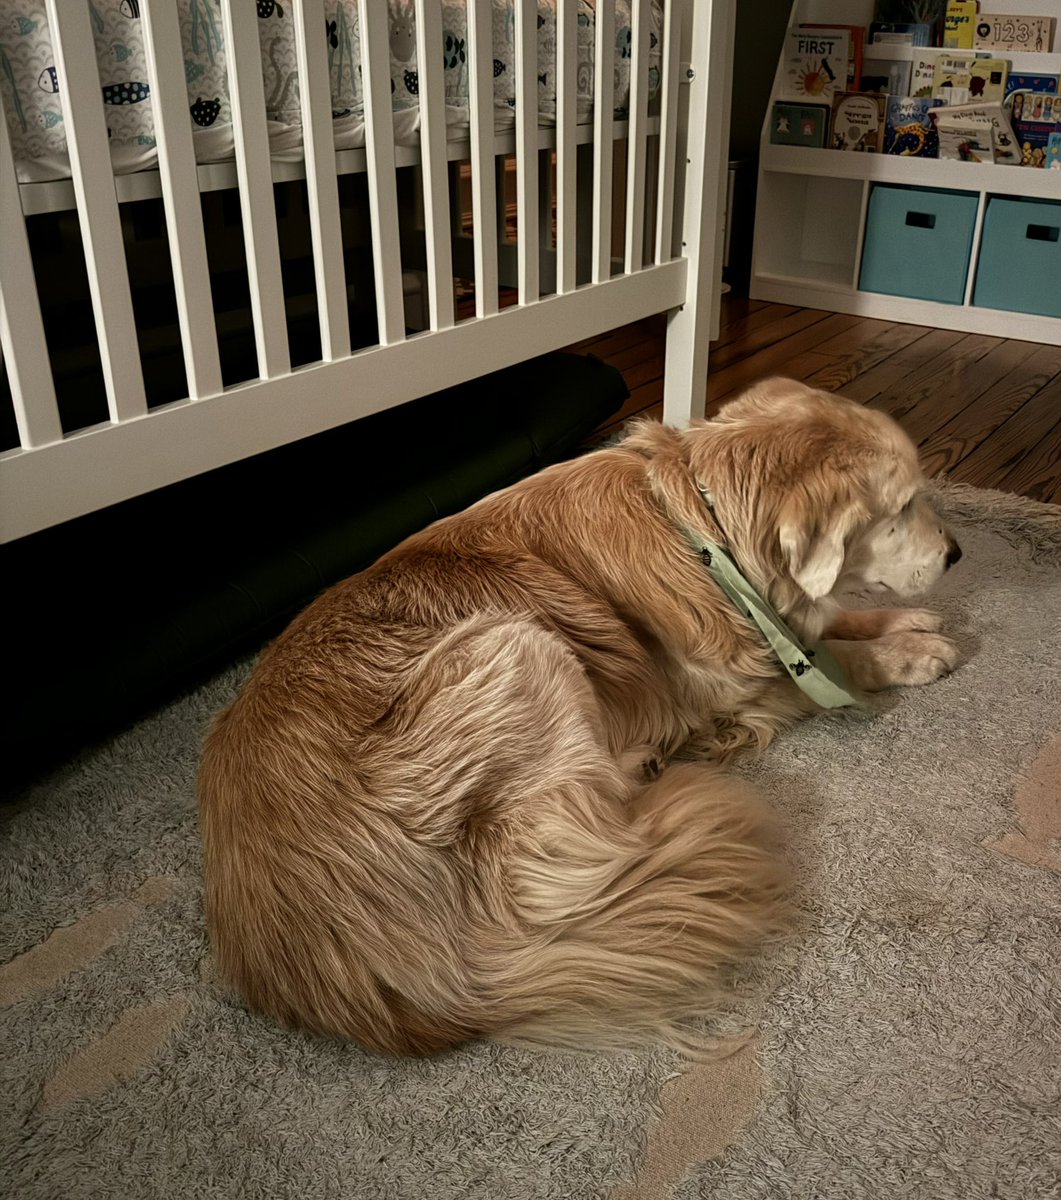 Your #dailywally says to get some sleep, he can handle the nighttime feedings